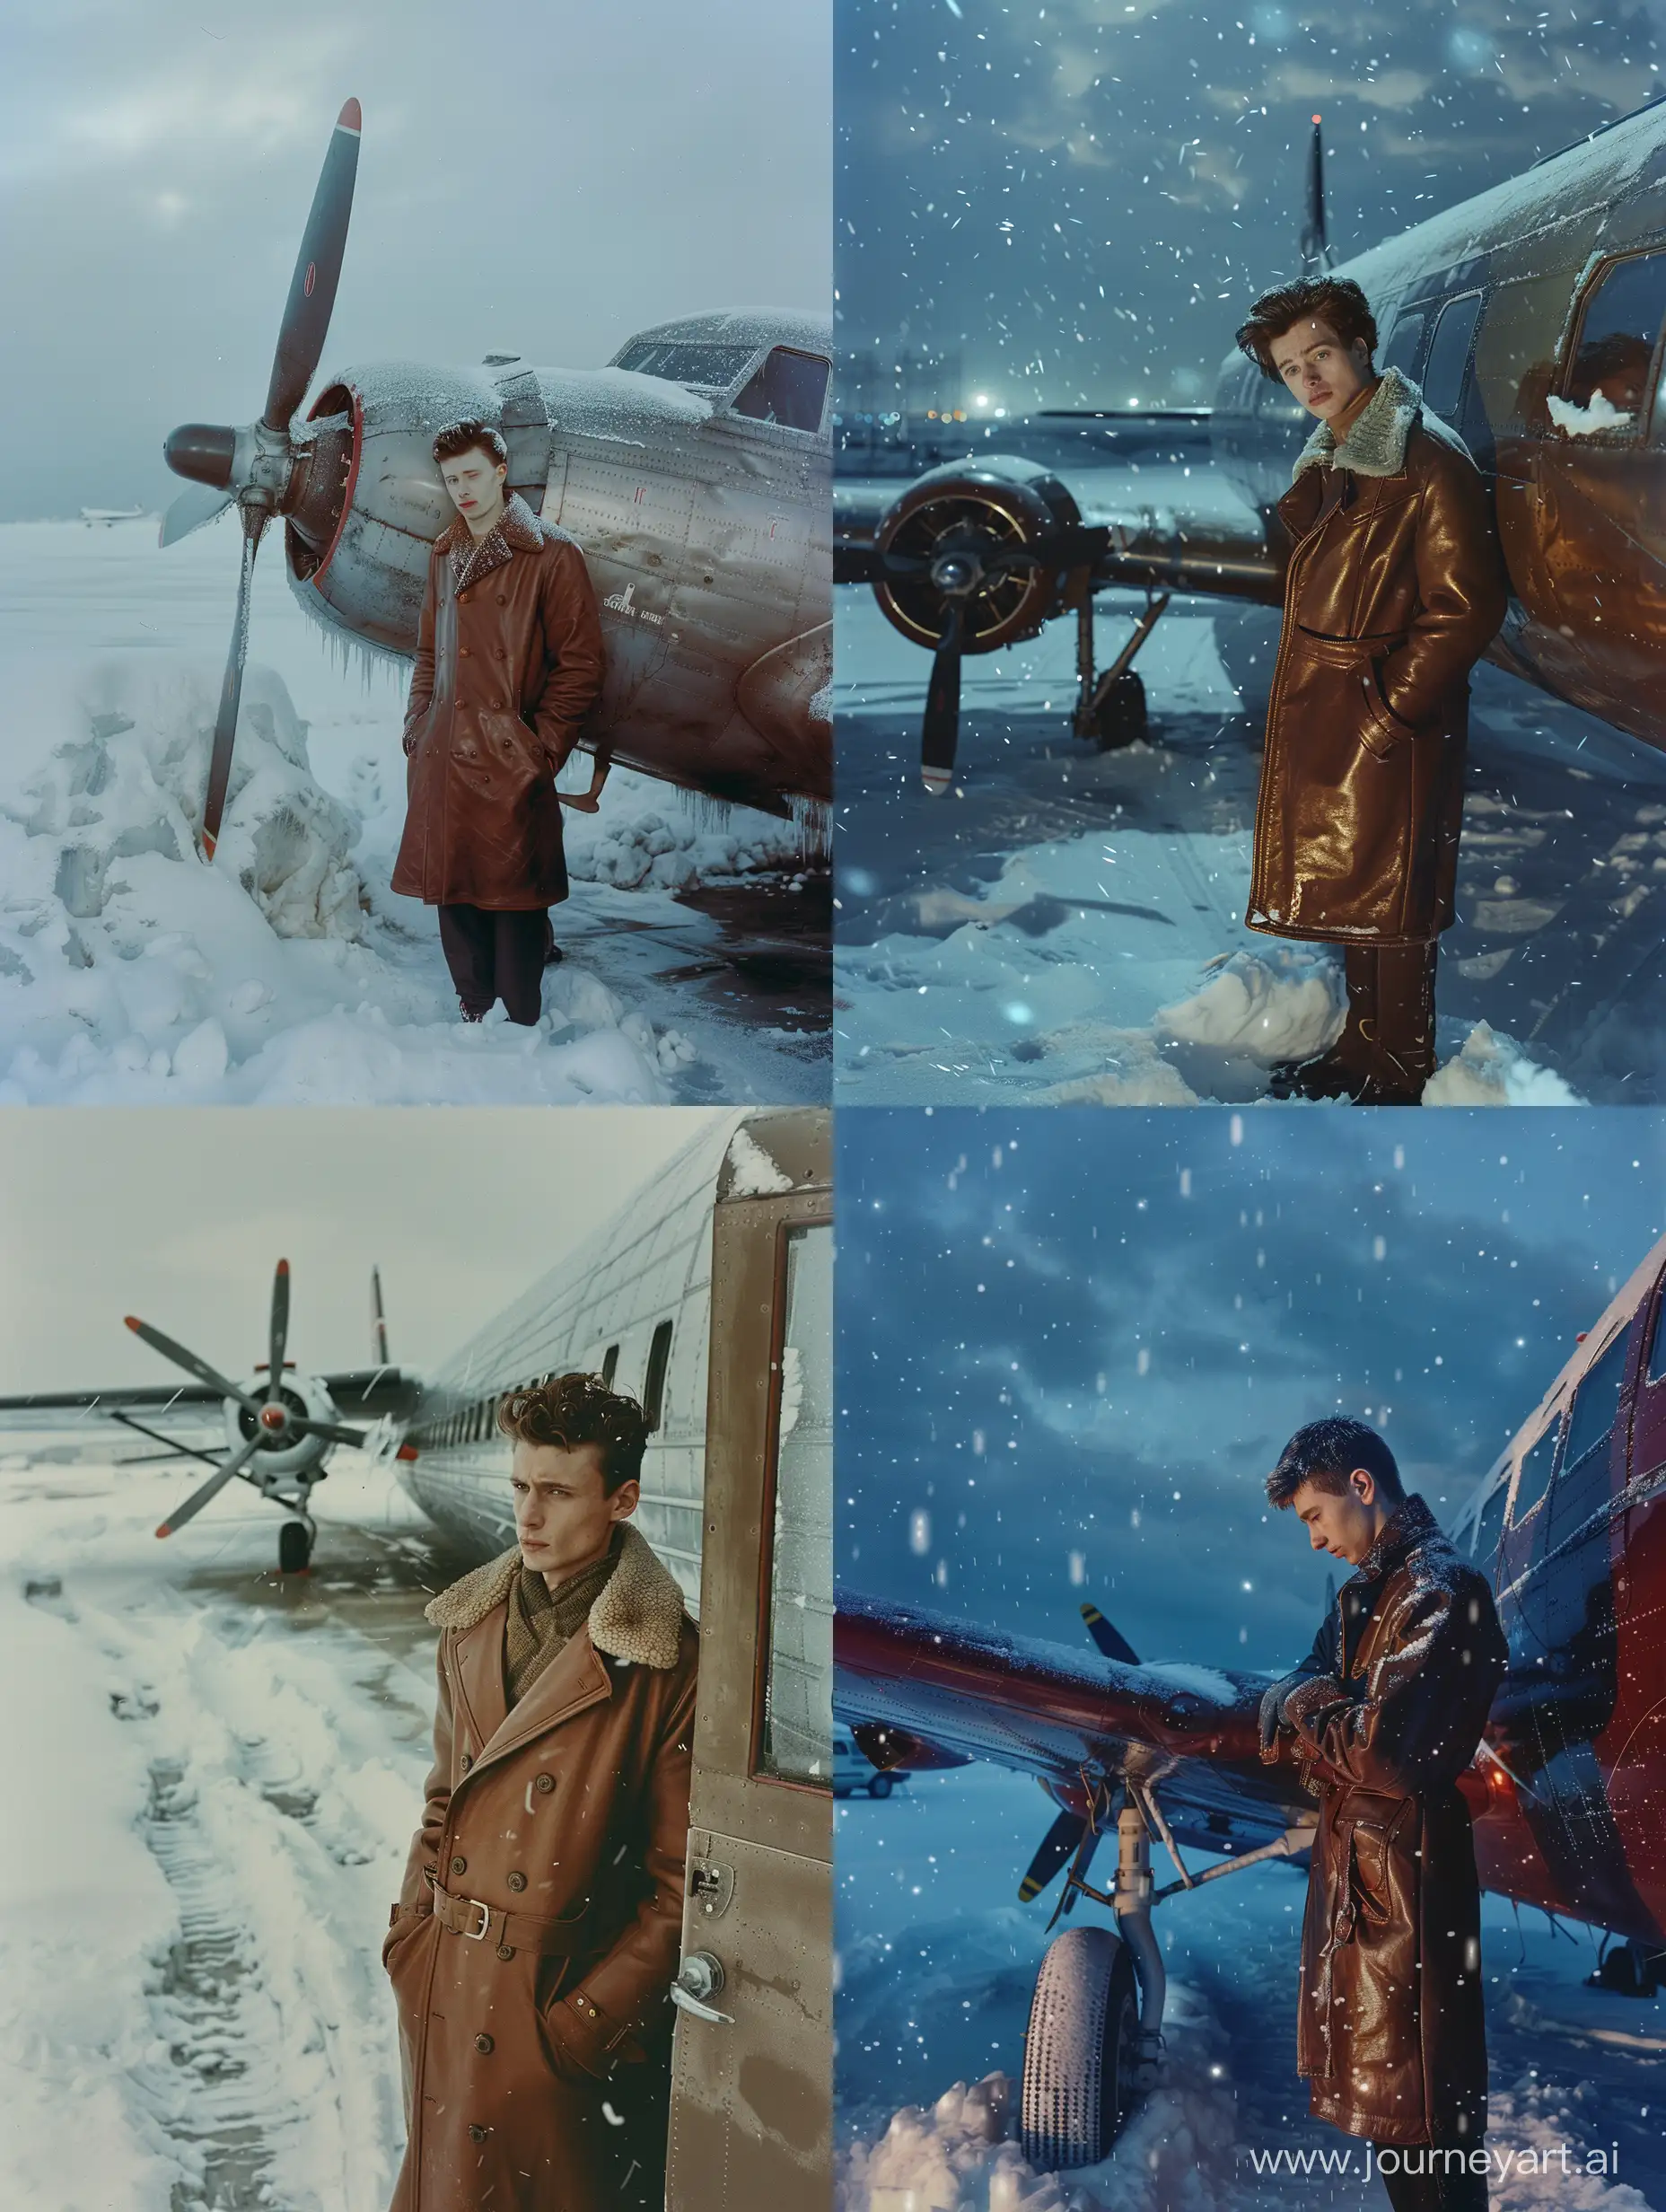 a man standing next to a parked airplane in the snow and ice, an album cover, tonalism, wearing a brown leather coat, perfectly lit. movie still, ffffound, volodymyr zelenskyy, young simon baker, wide open city ”, kodachrome 8 k, star